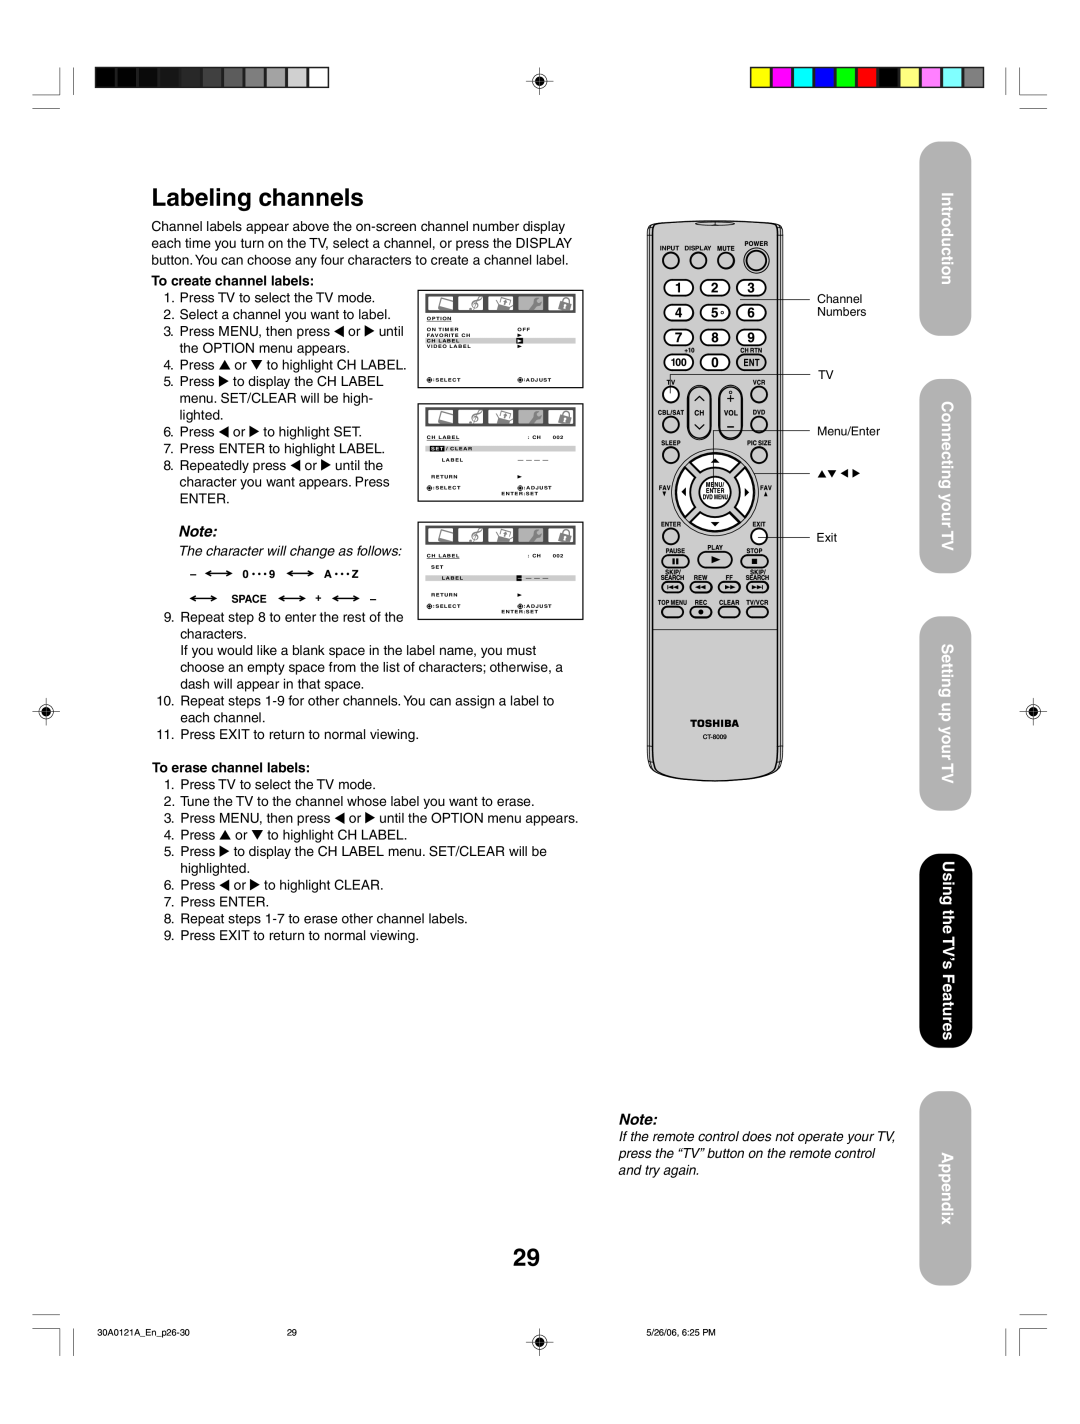 Toshiba 50HP86 Labeling channels, Setting up your TV Using the TV’s Features, Appendix, Introduction, Connecting your 